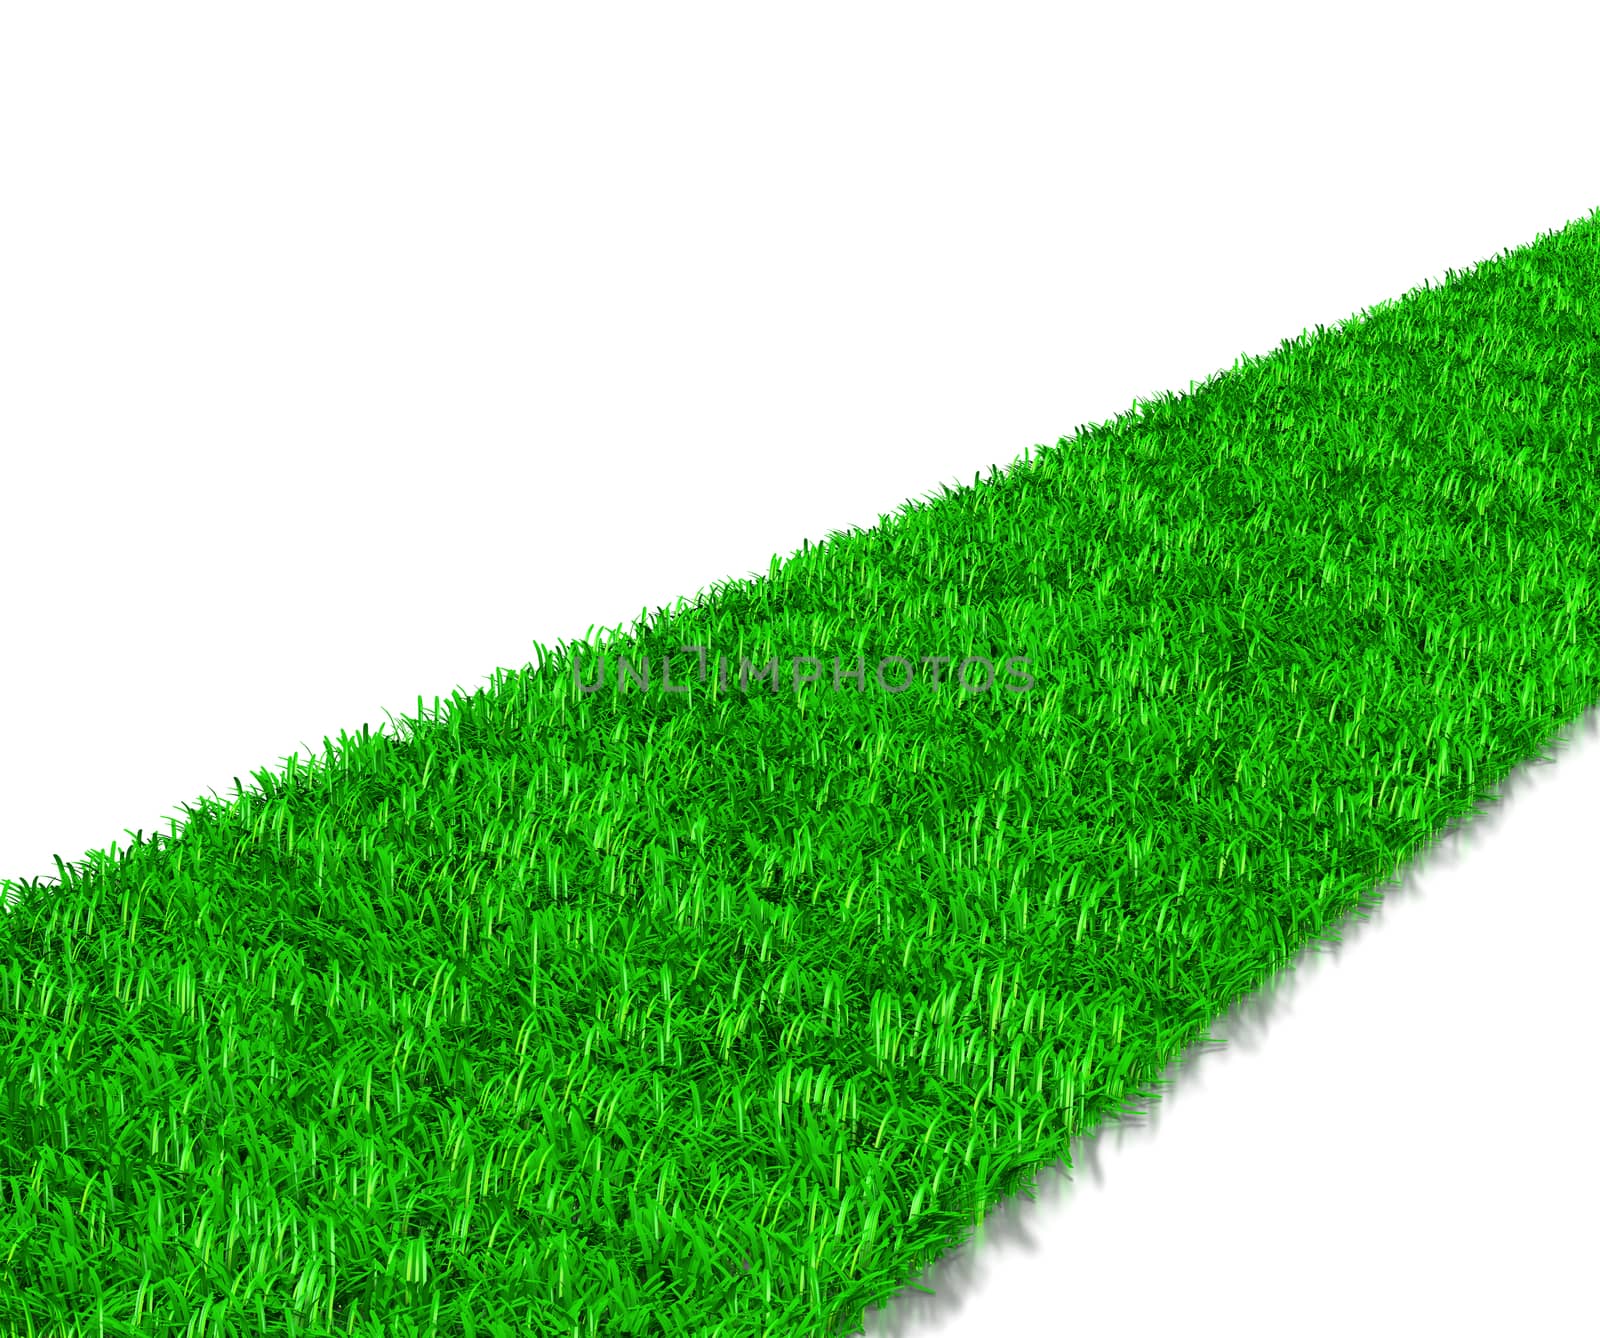 Green Grass Way 3D Illustration on White Background